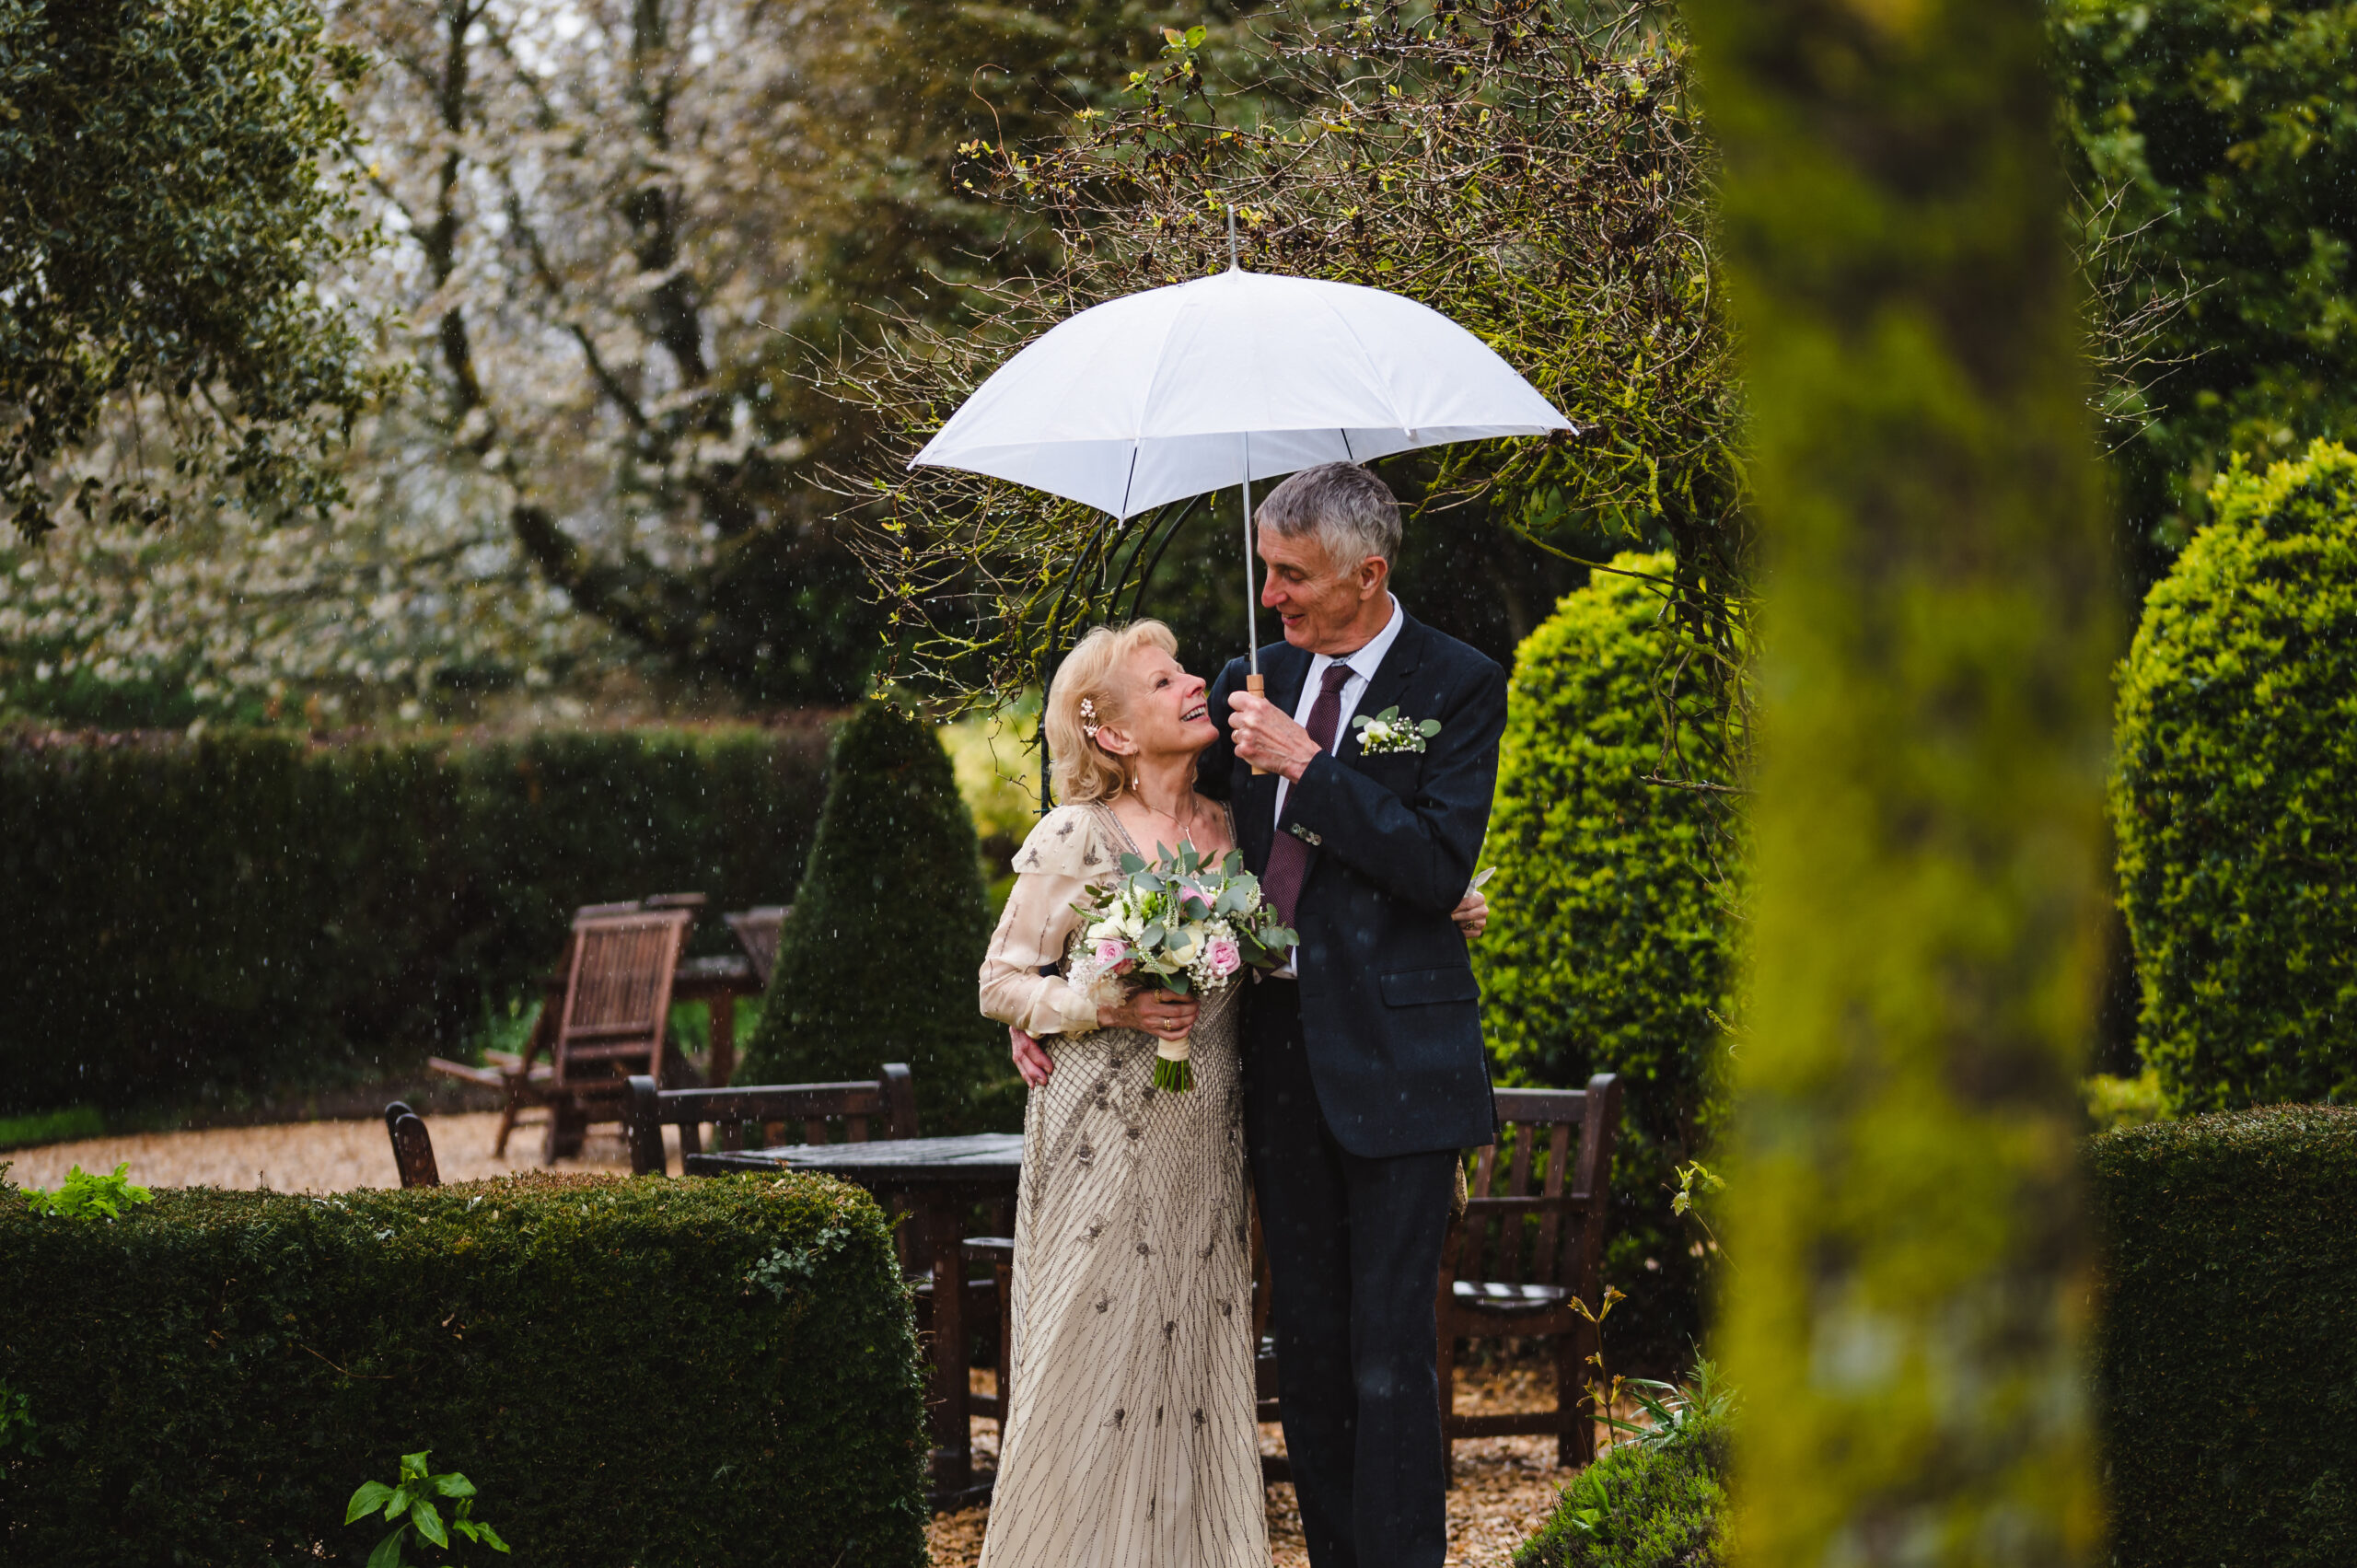 Wedding portraits in the gardens at the barnsdale